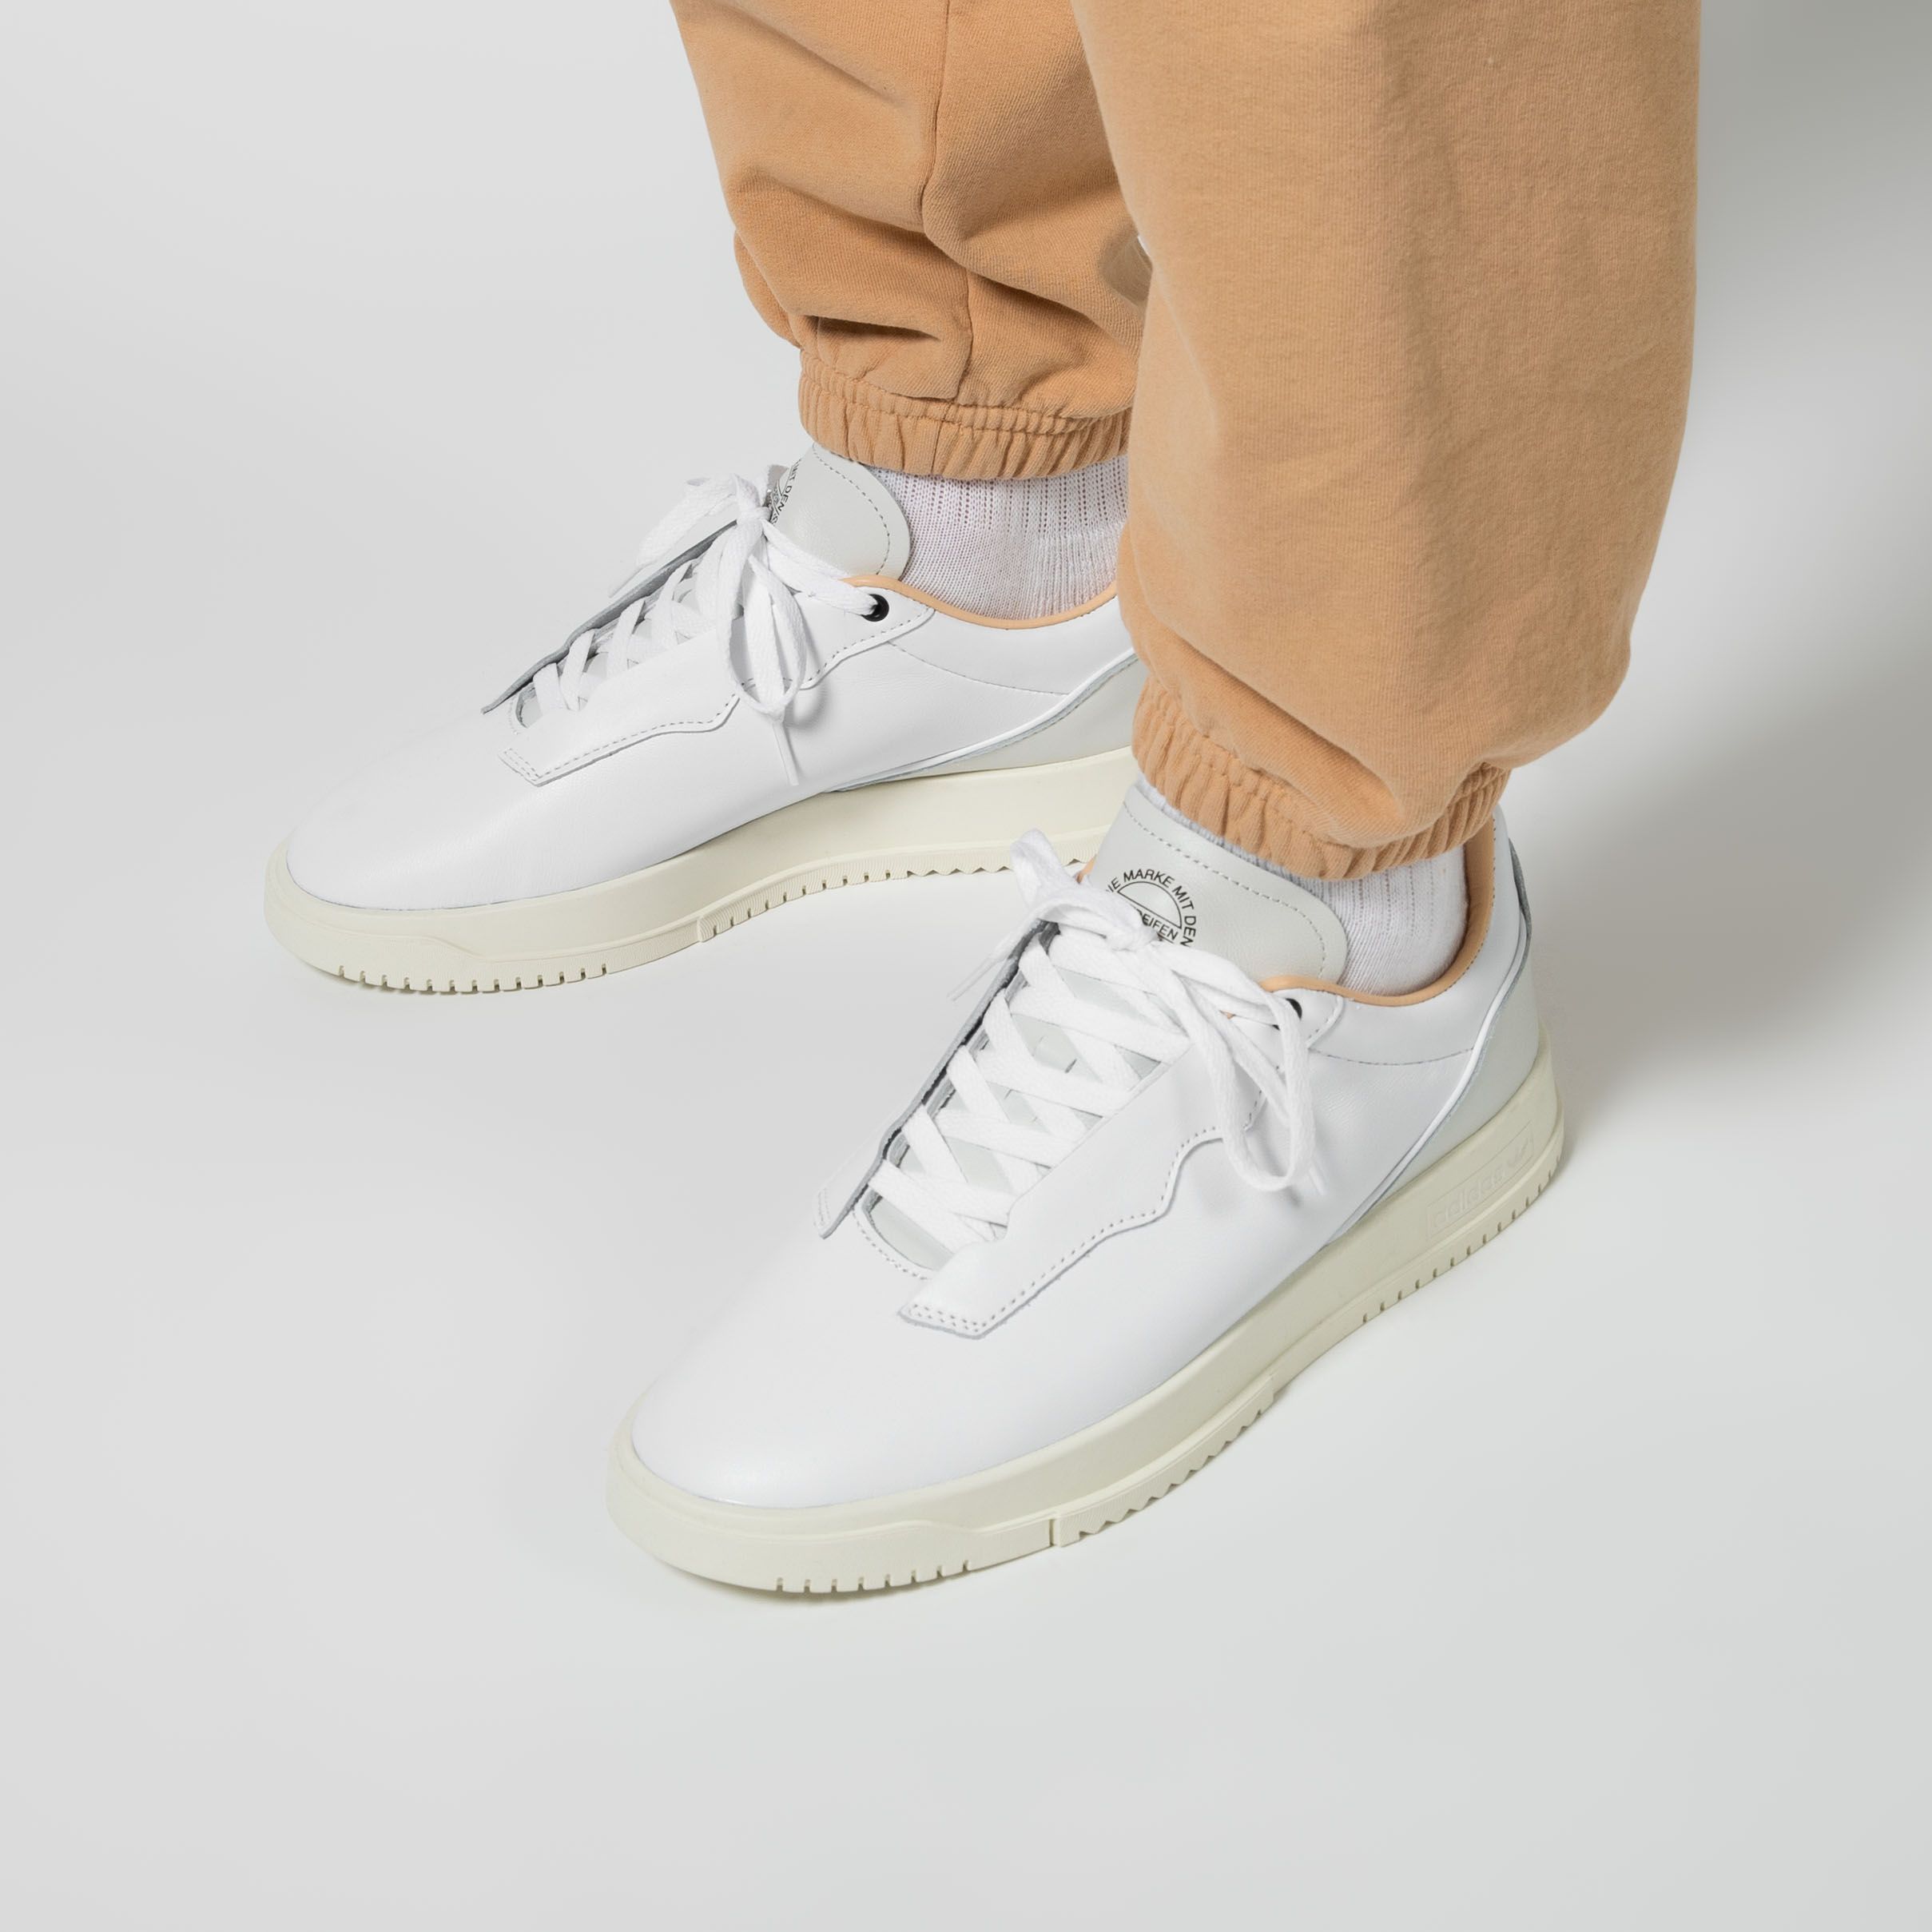 Twitter \ Titolo على تويتر: "NEW⚪️ go minimalistic these adidas SuperCourt Premium ⚪️ add up best of the brand's court archive 🎾 all in one streamlined silhouette. l i n